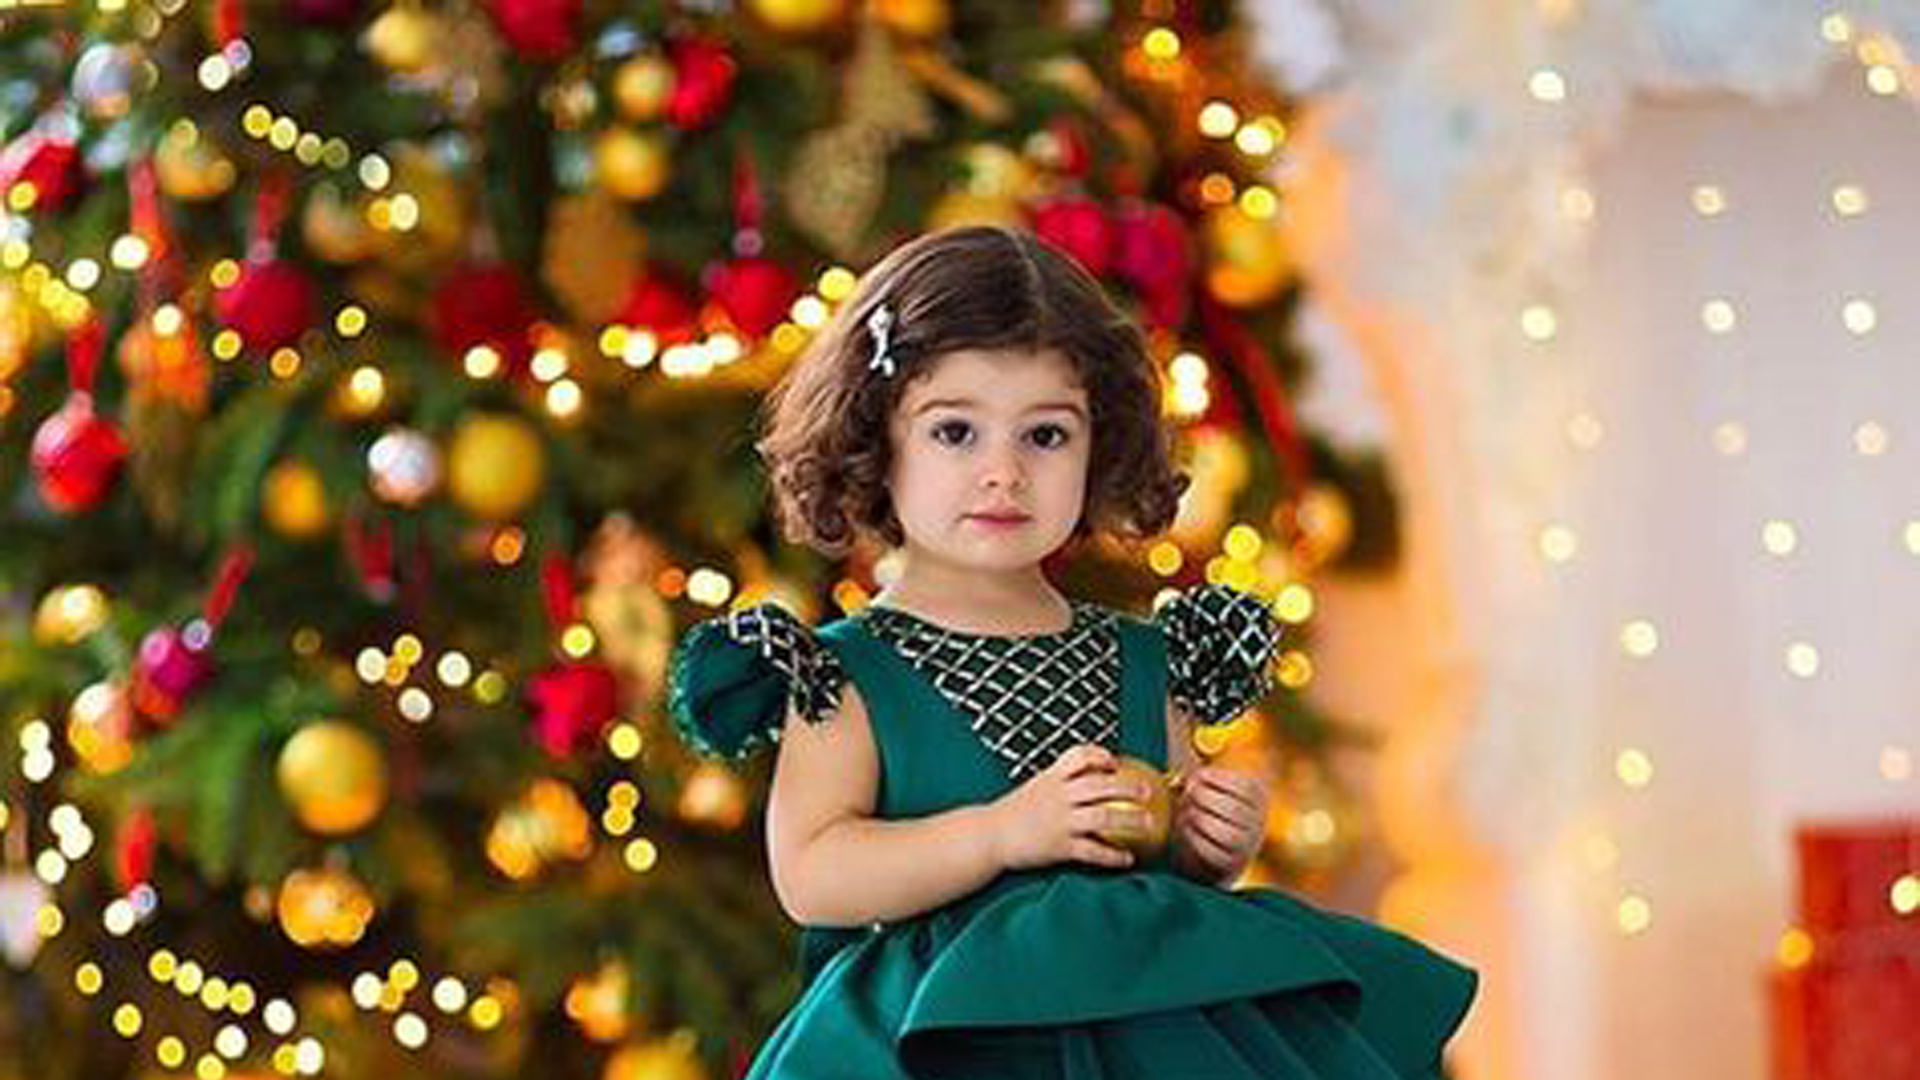 Beautiful Little Girl Is Standing In Decorated Christmas Tree Wallpaper Wearing Green Dress HD